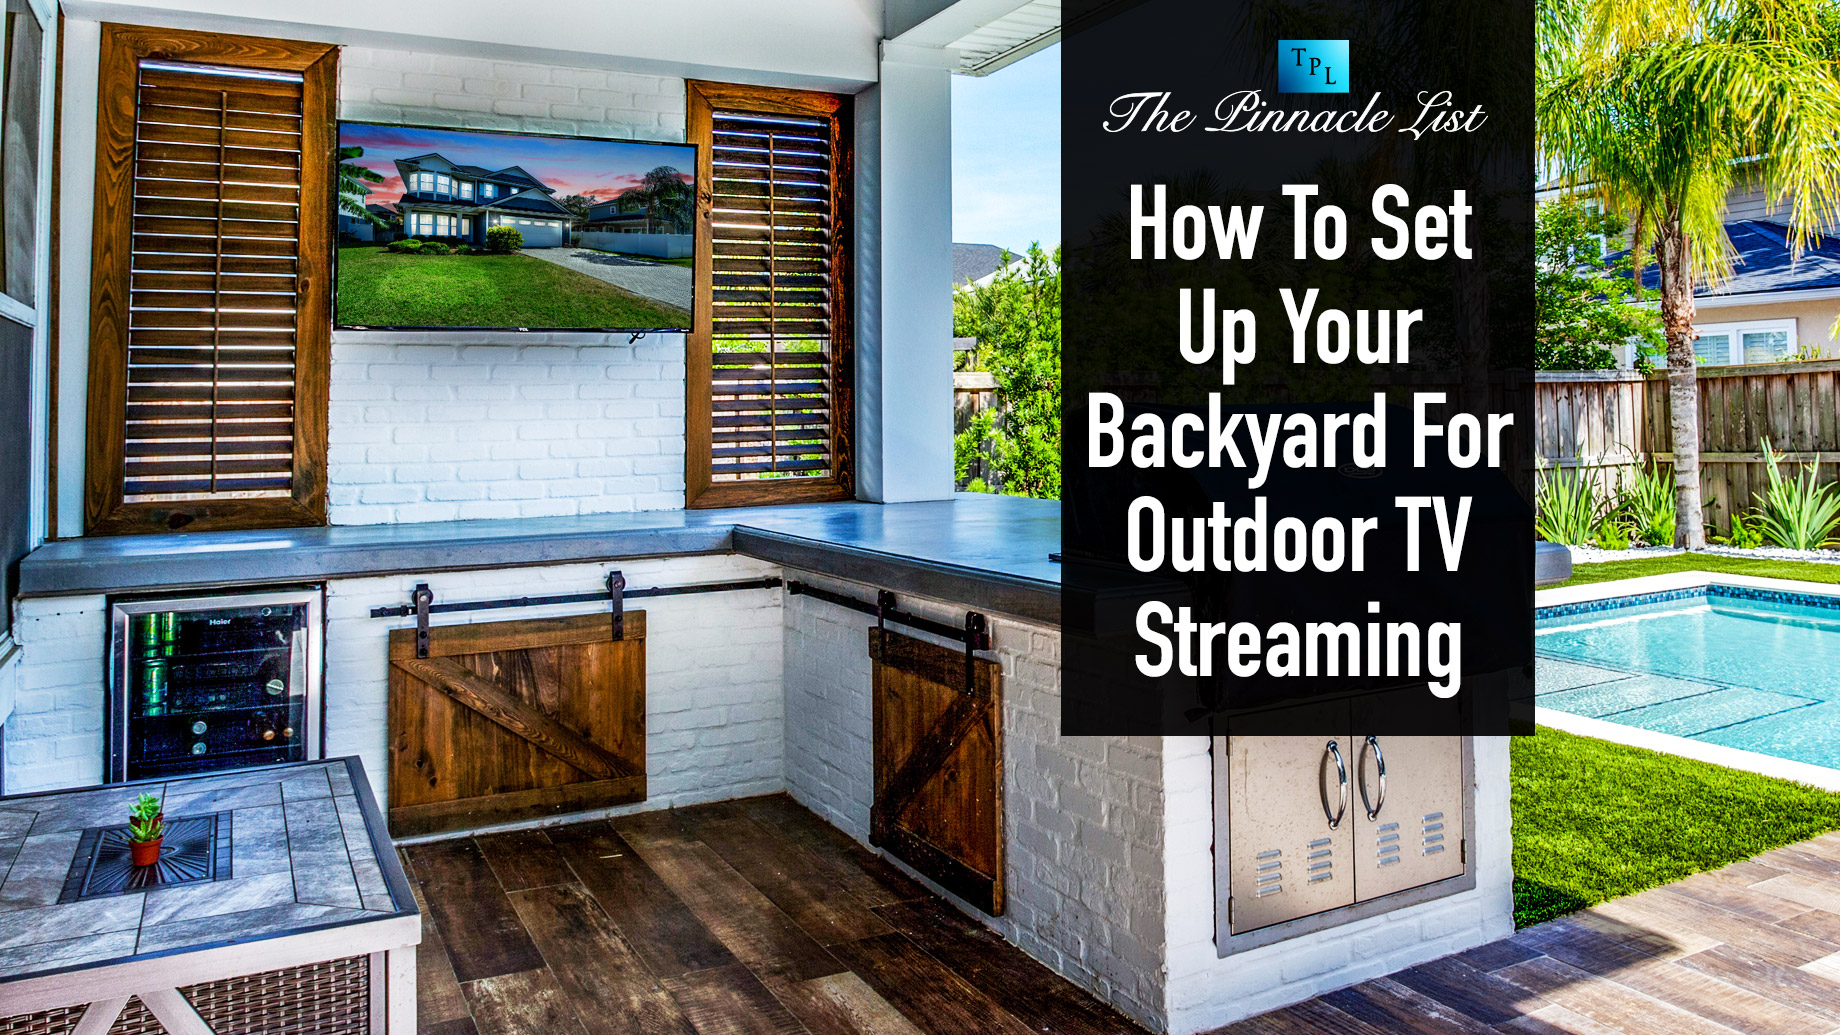 How To Set Up Your Backyard For Outdoor TV Streaming